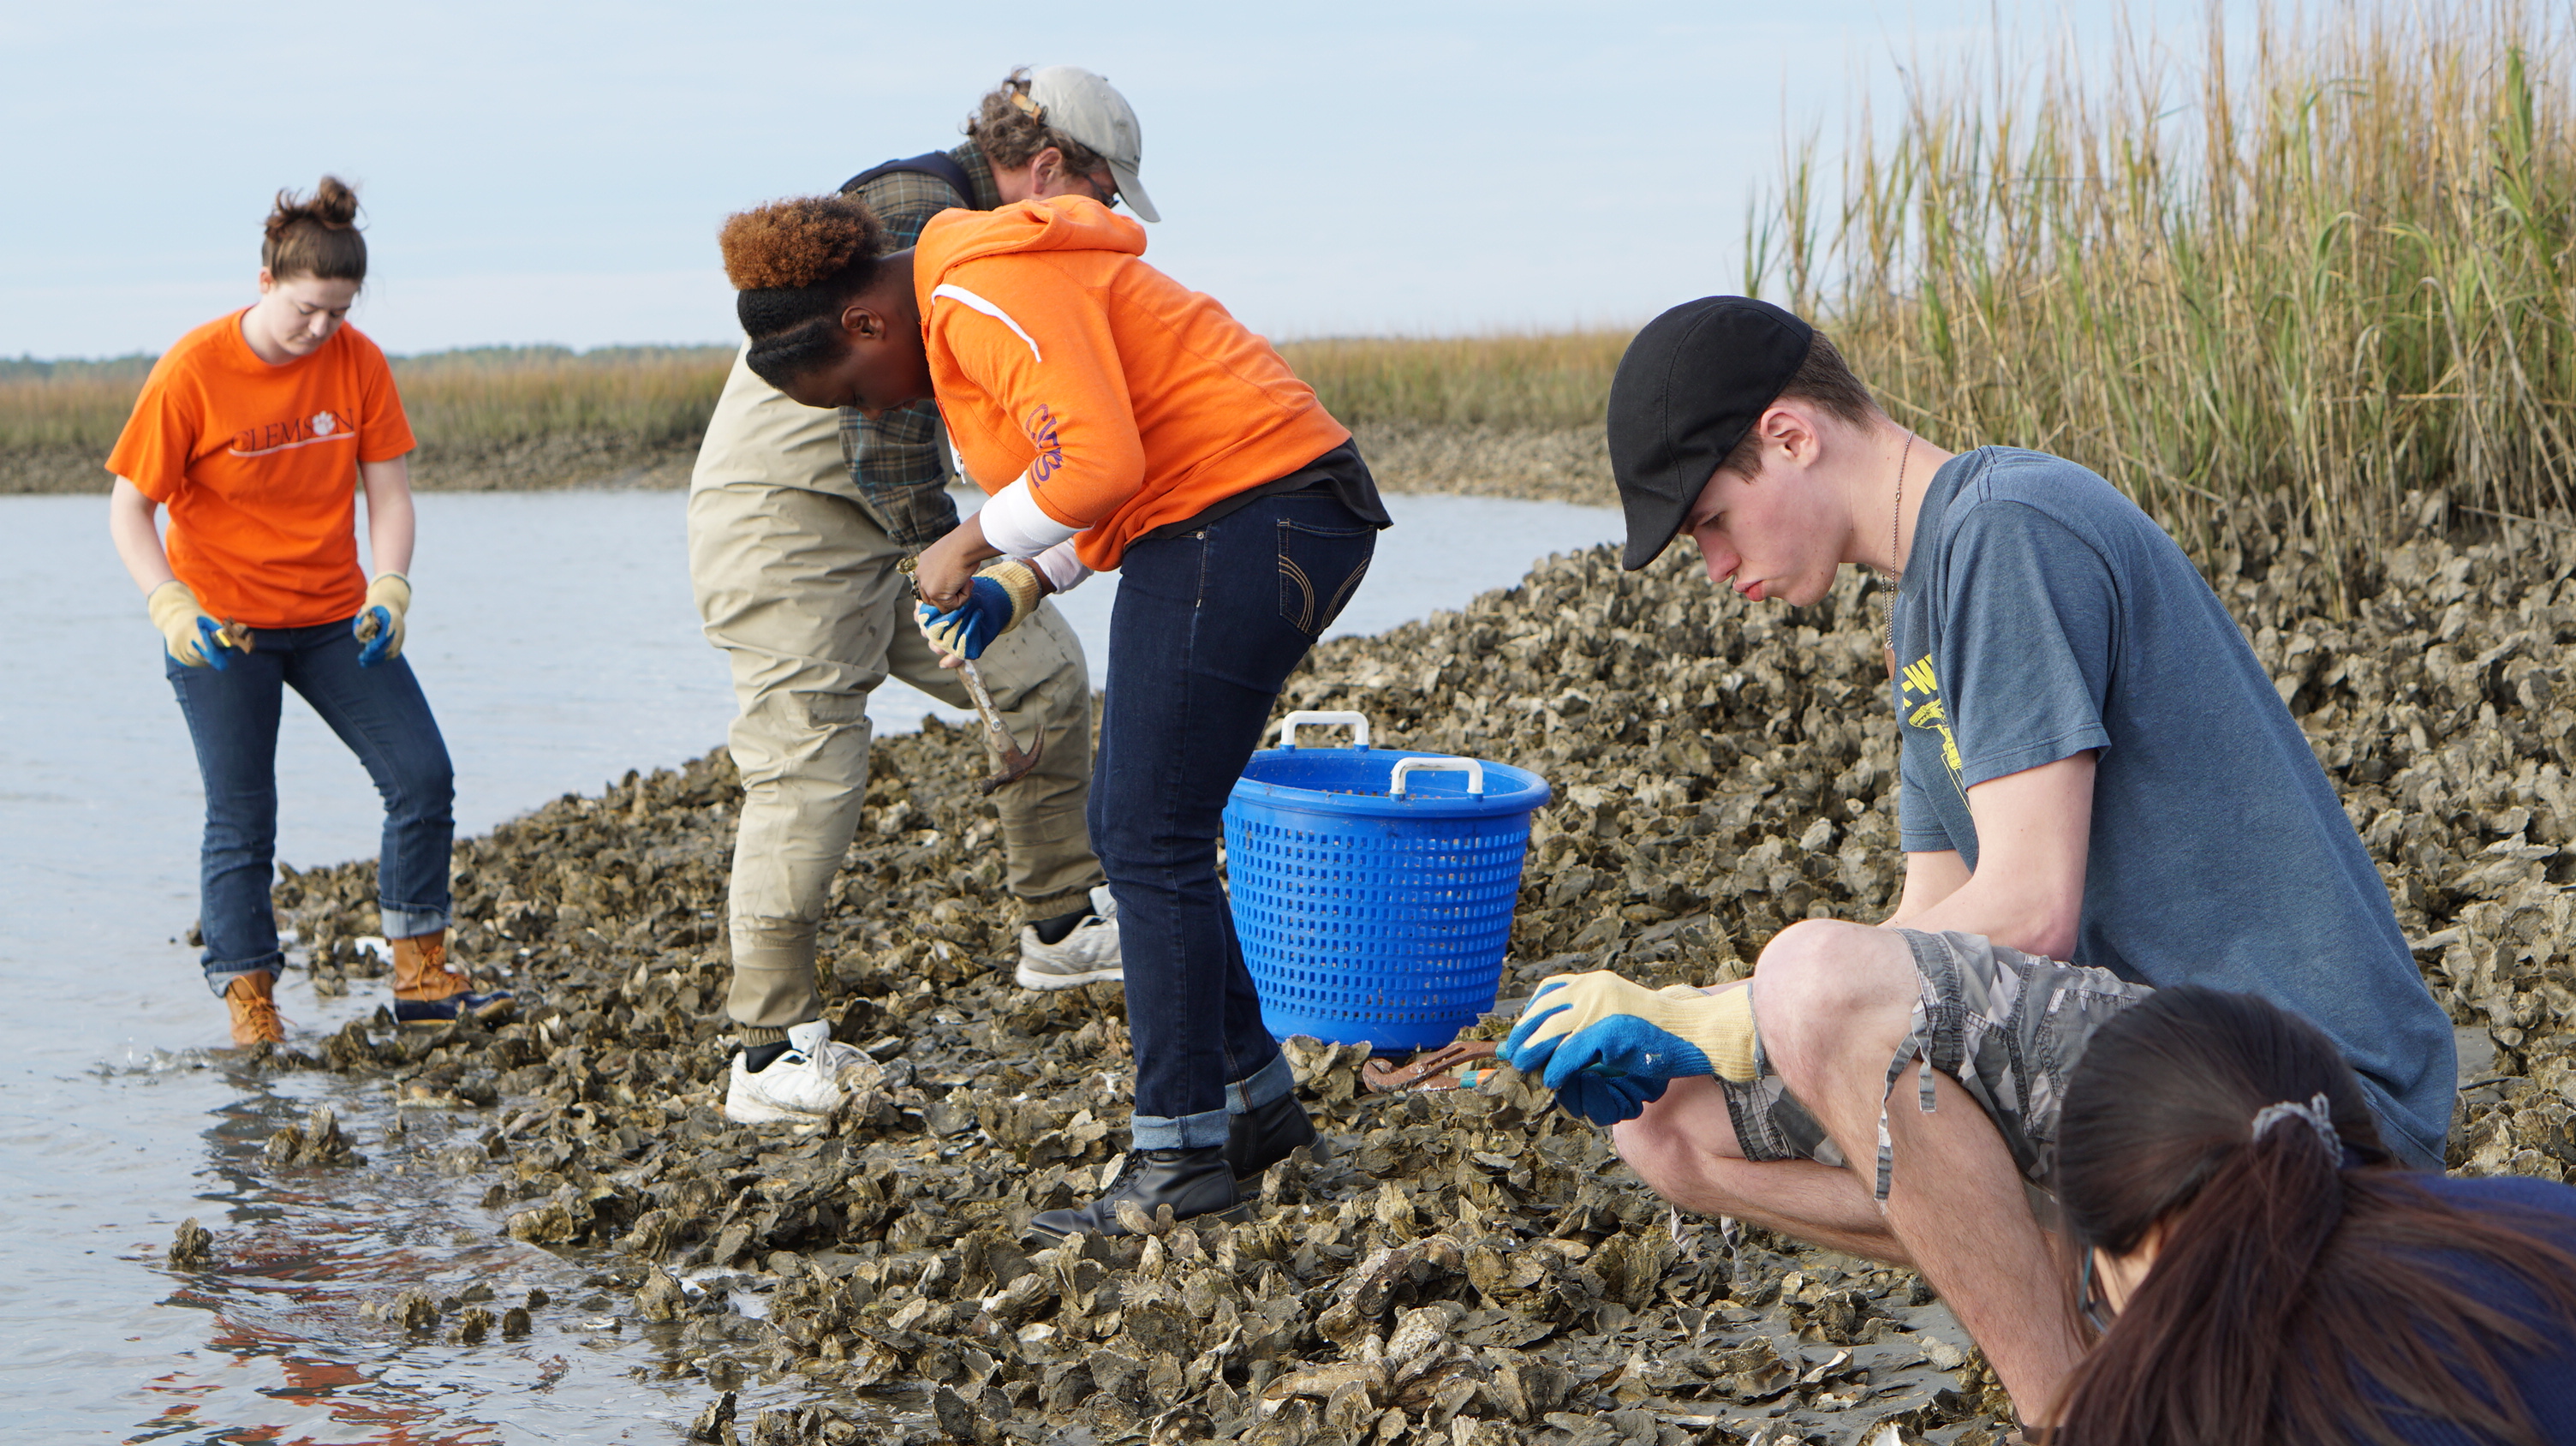 This CI team is collecting oysters in Georgetown, SC to study the impact of increased CO2 in water on oyster shell formation.